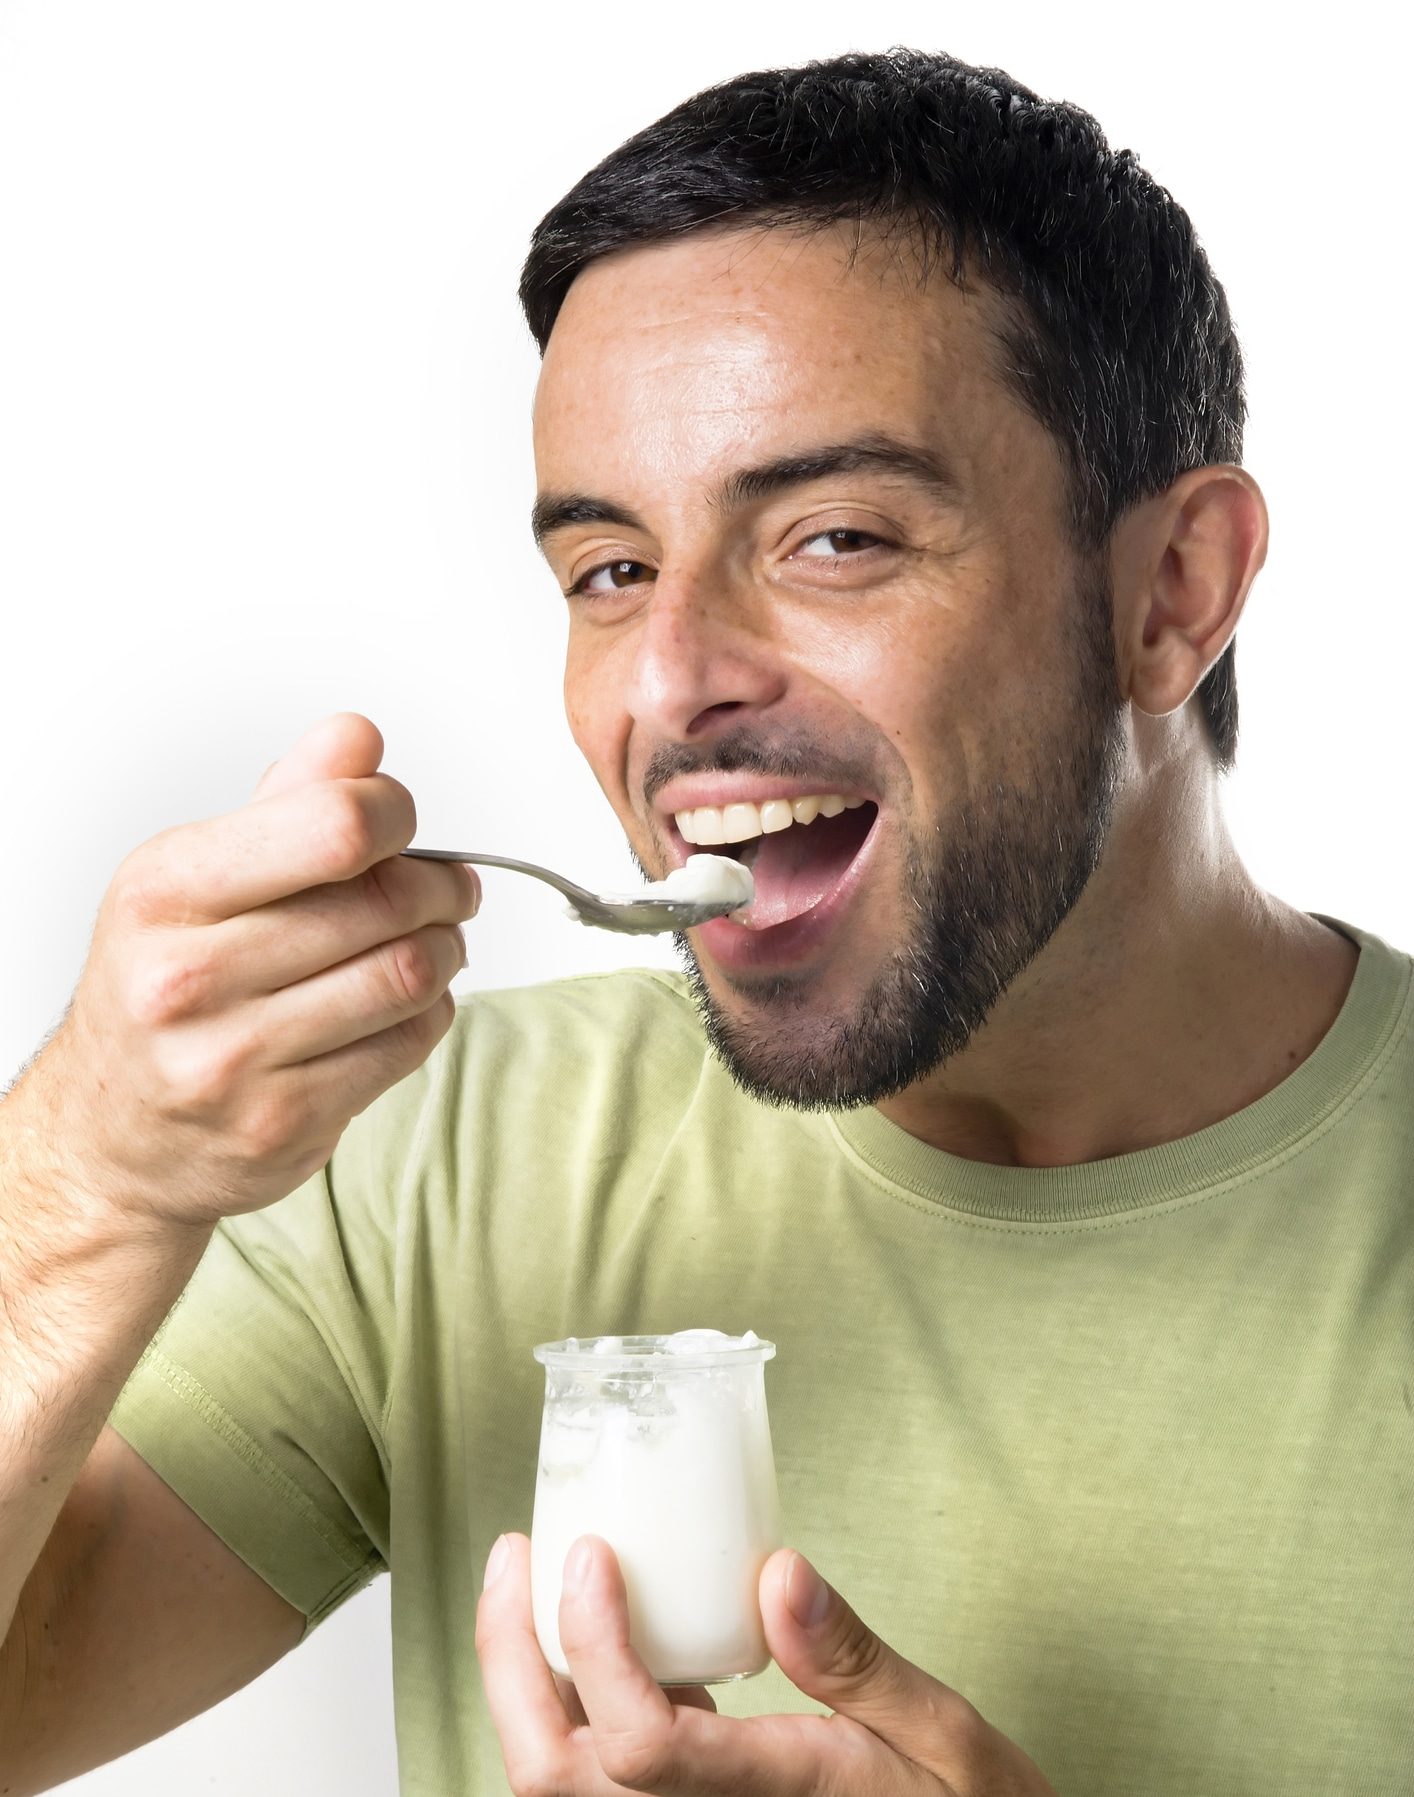 Dairy and Diabetes: A Snack Match for Balanced Blood Sugar